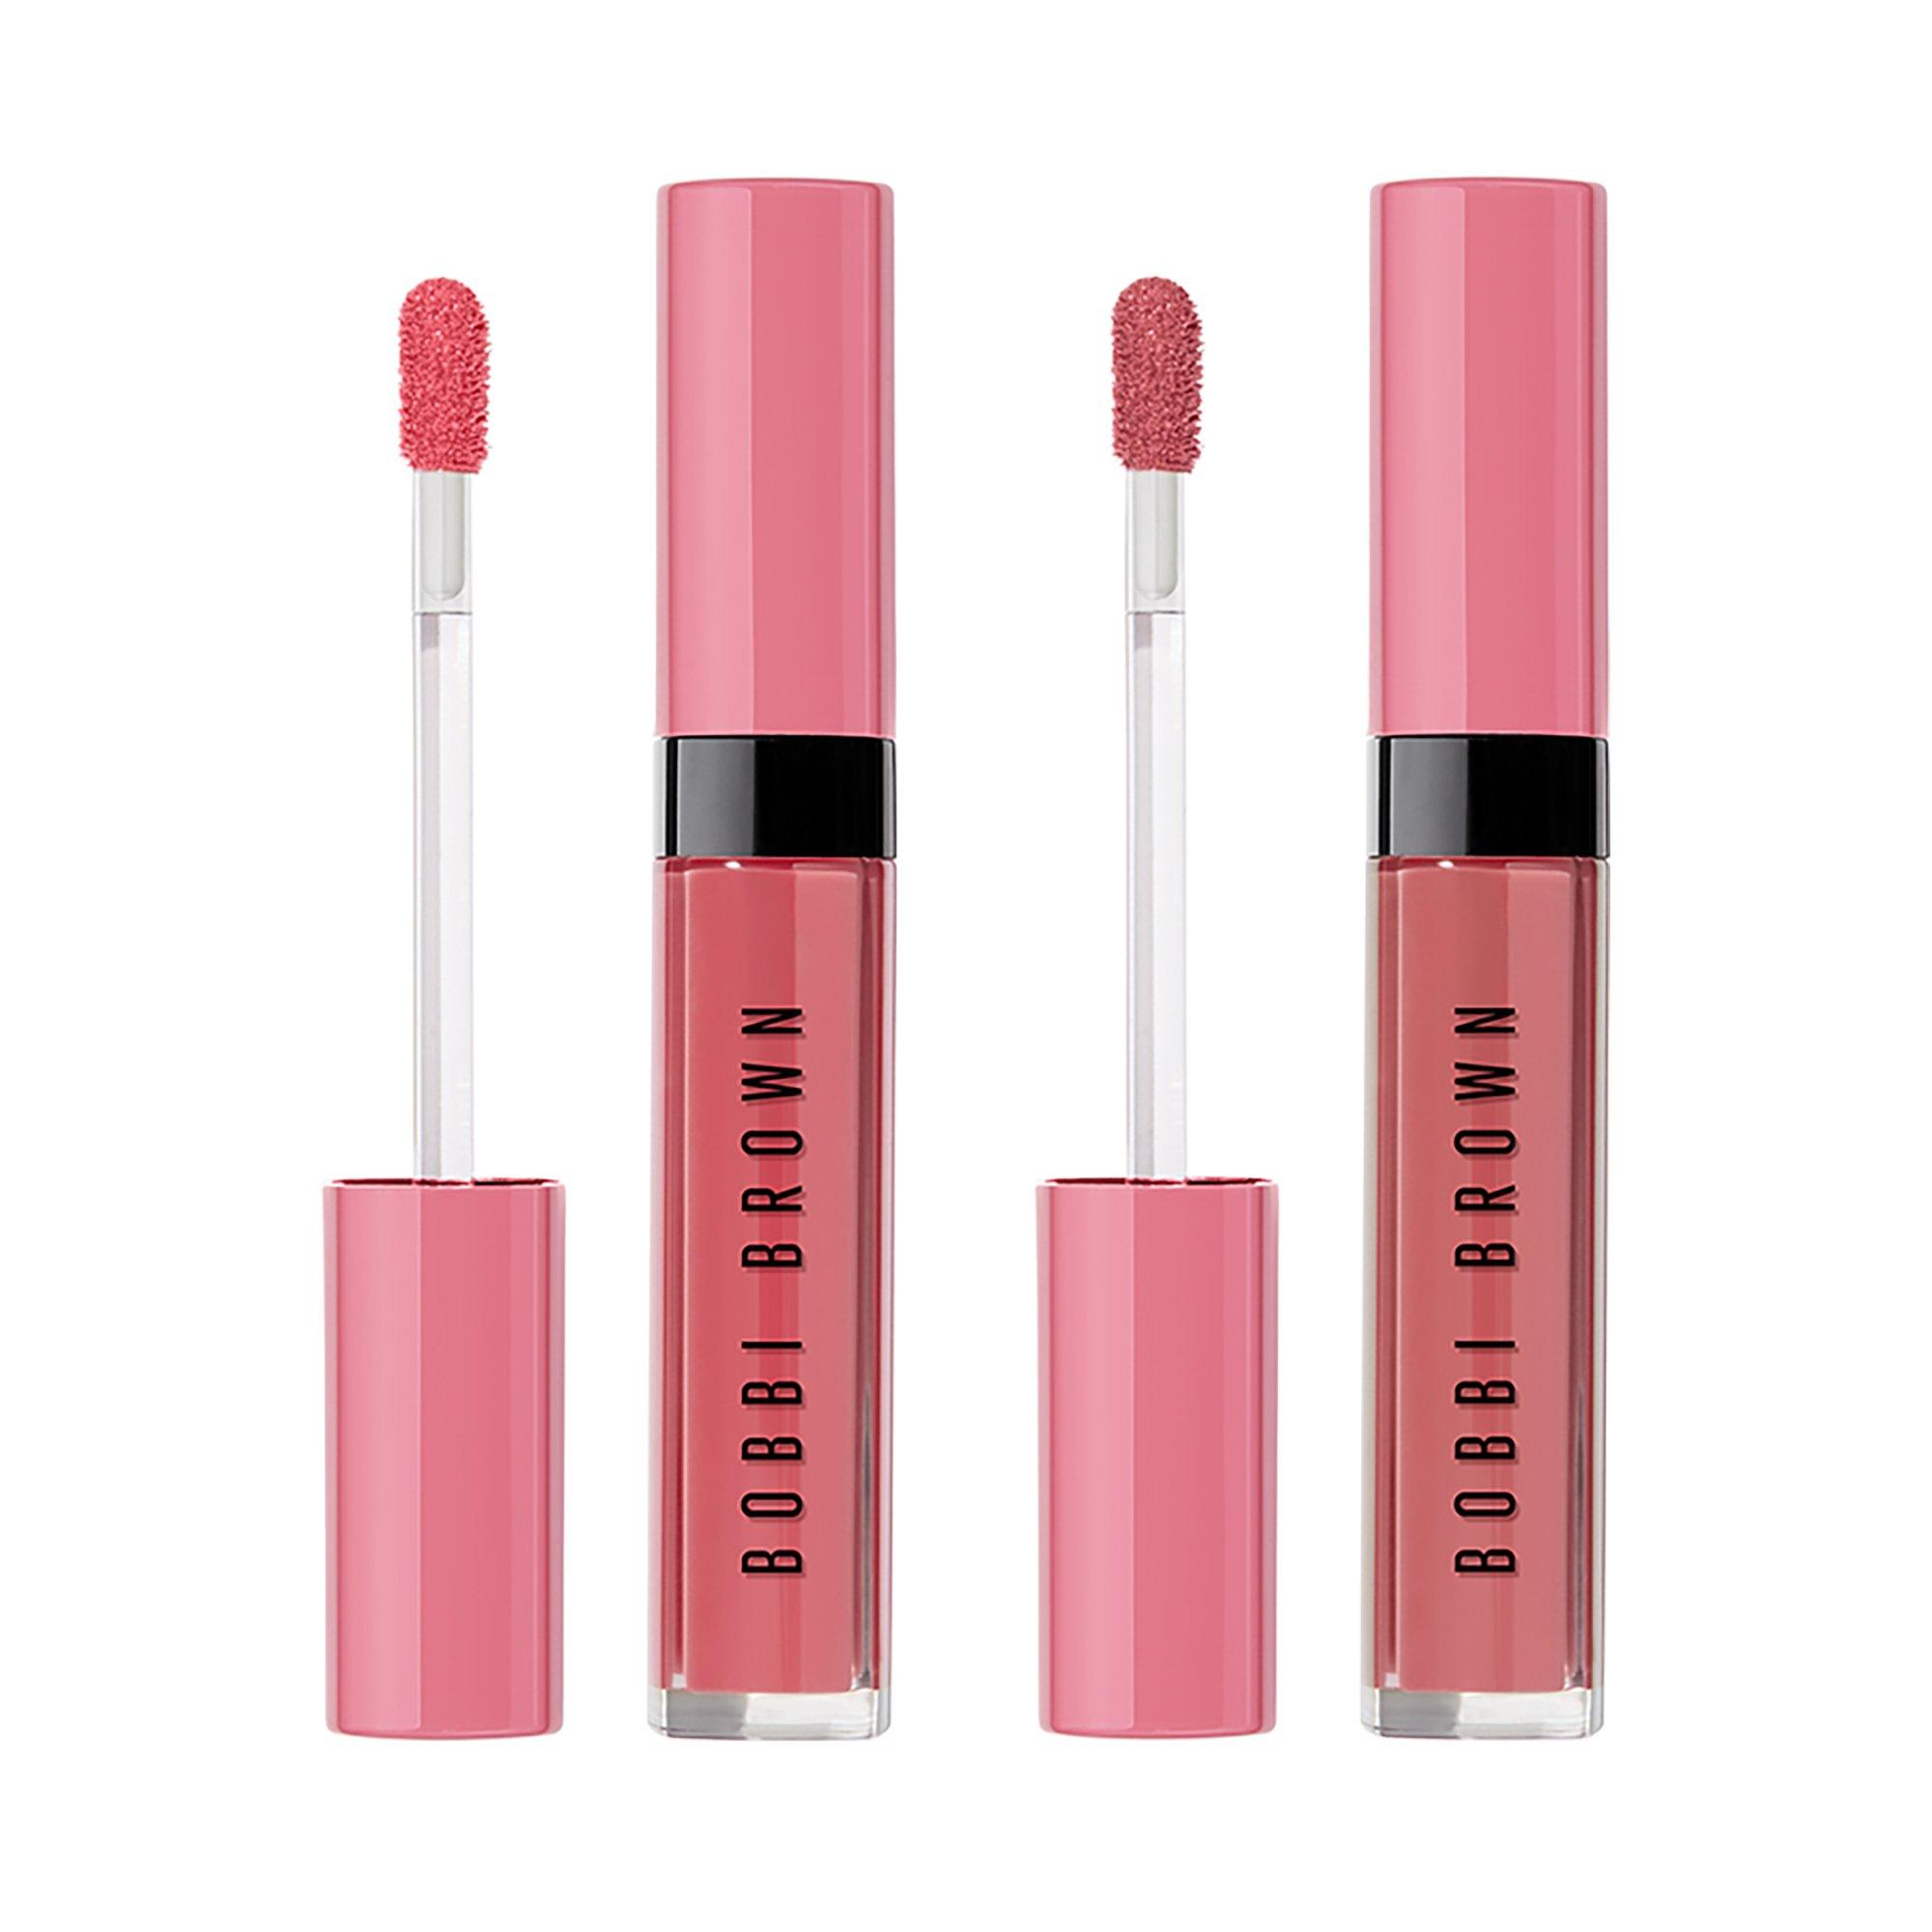 BOBBI BROWN Powerful Pinks Crushed Oil-infused Gloss Duo Unisexe Rose Set